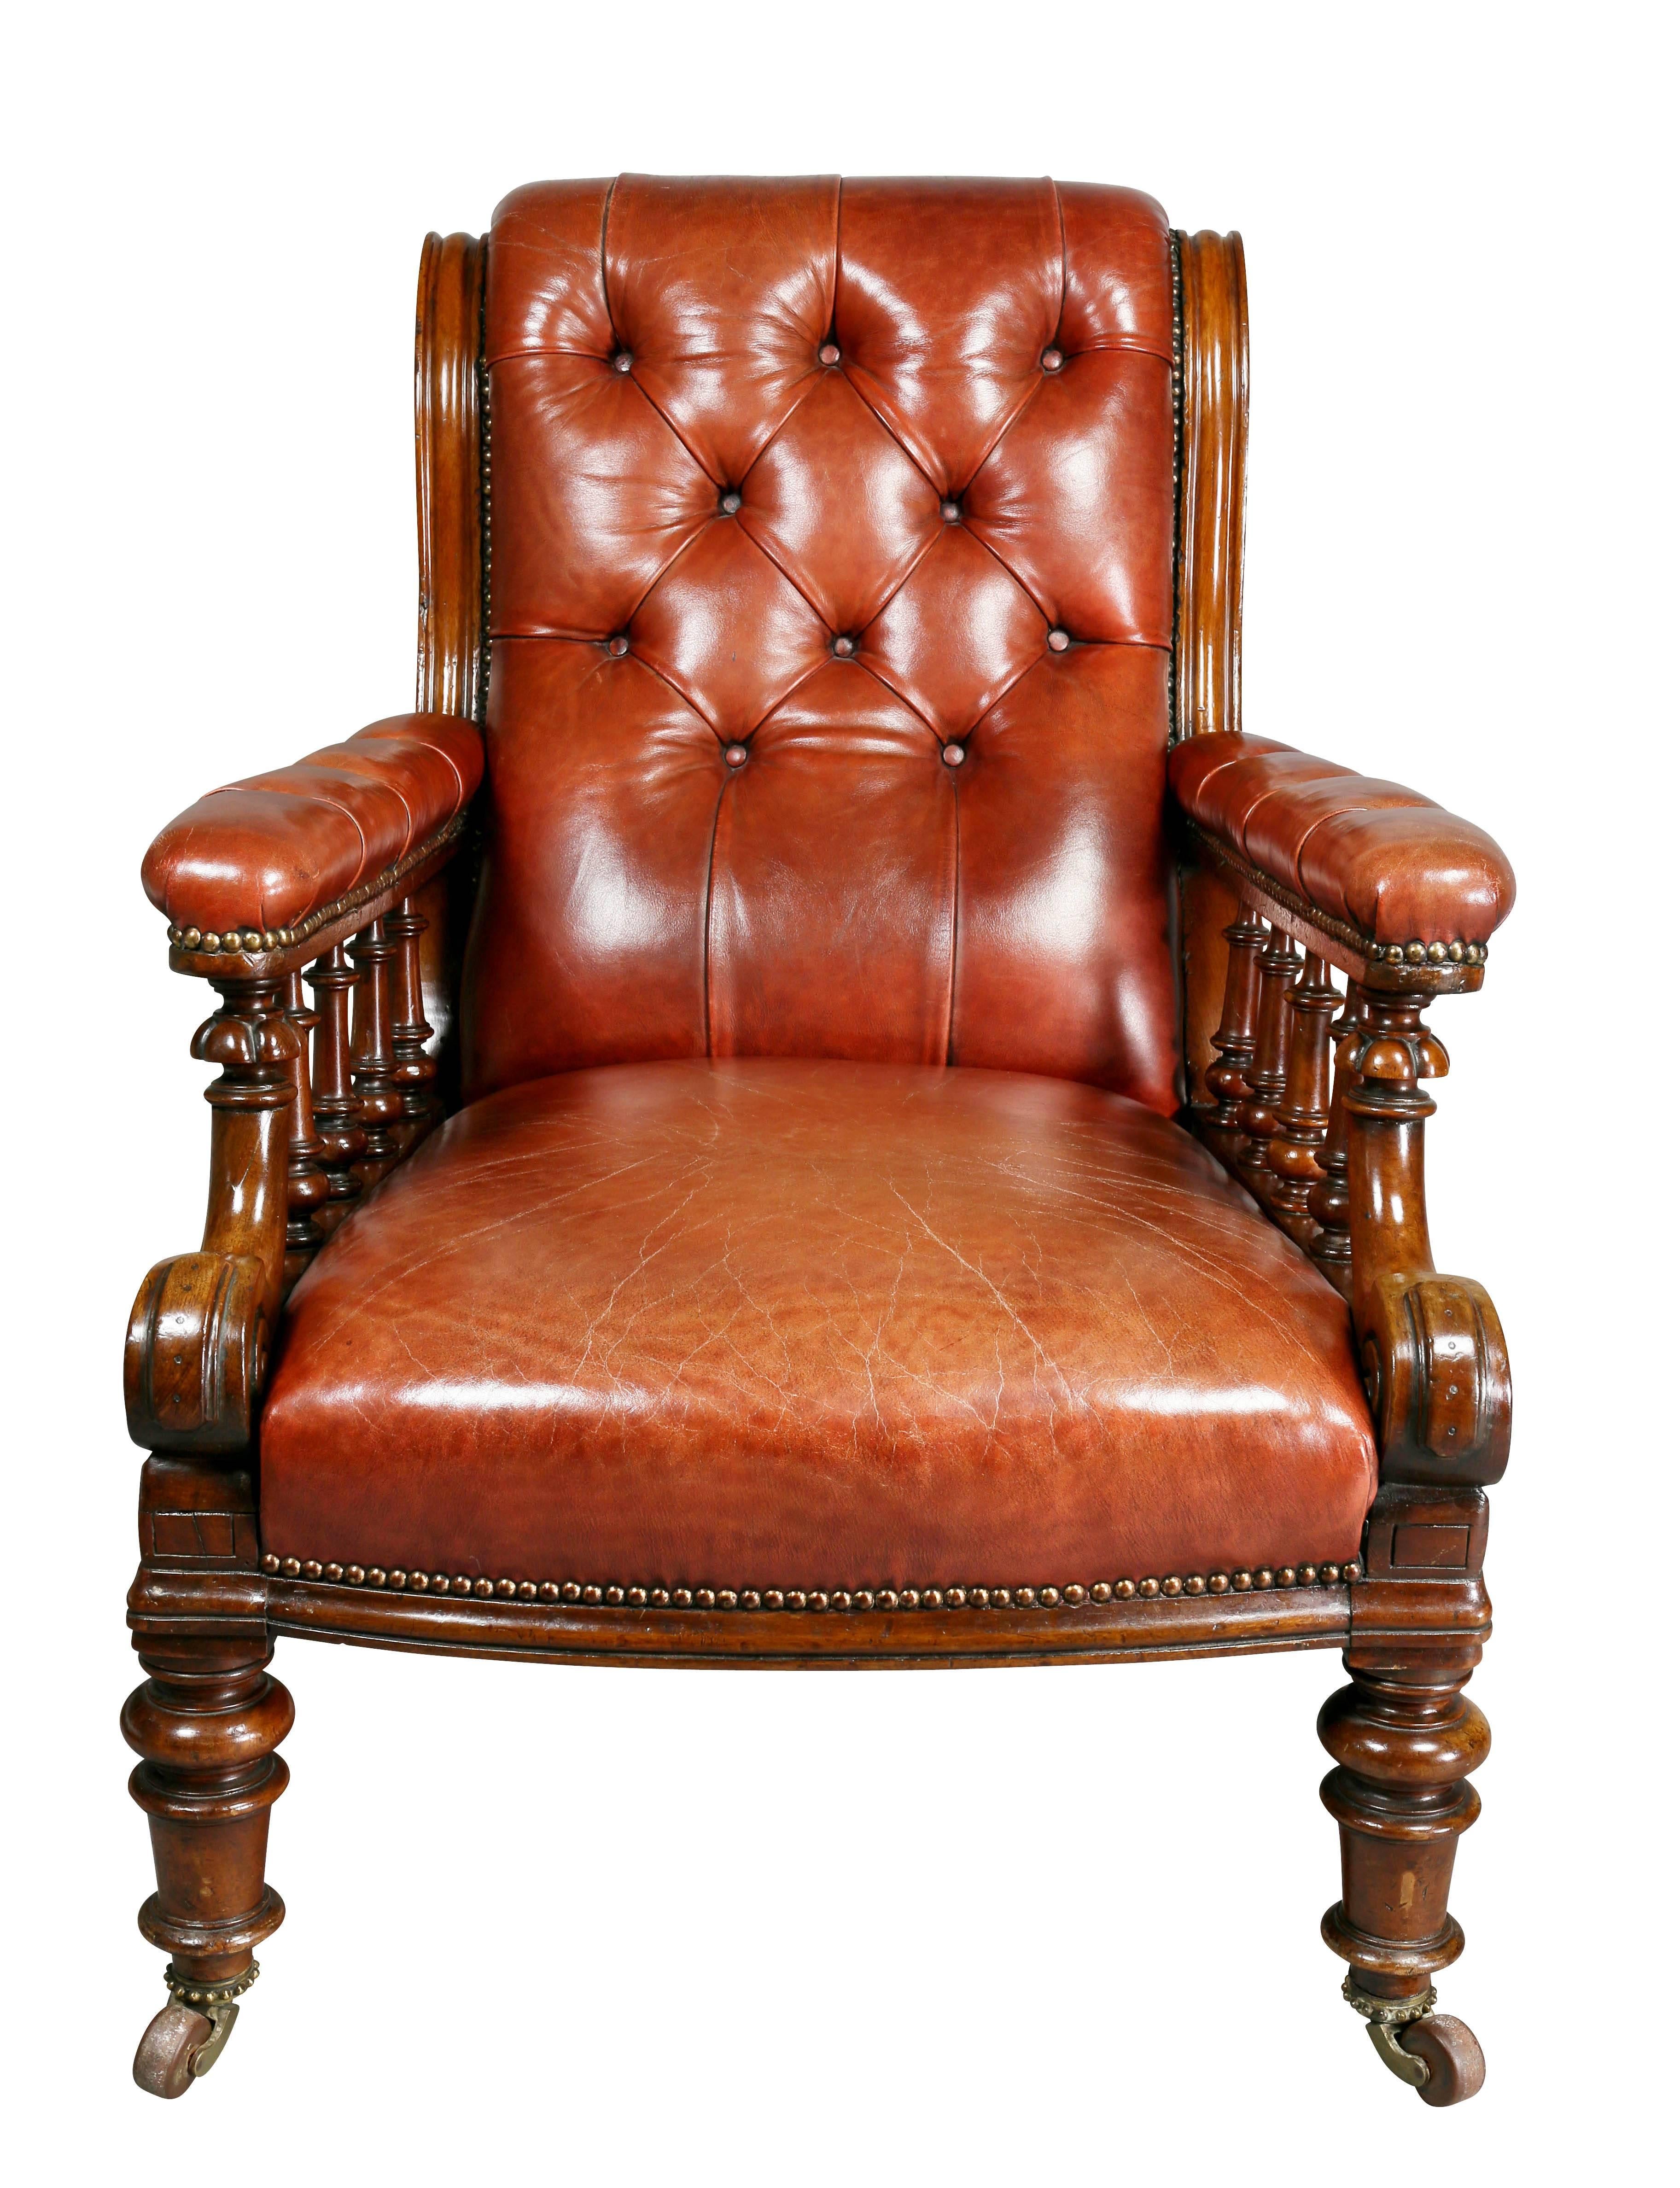 With buttoned brown leather back and seat, arms covered with leather over spindles, raised on turned tapered legs with casters.